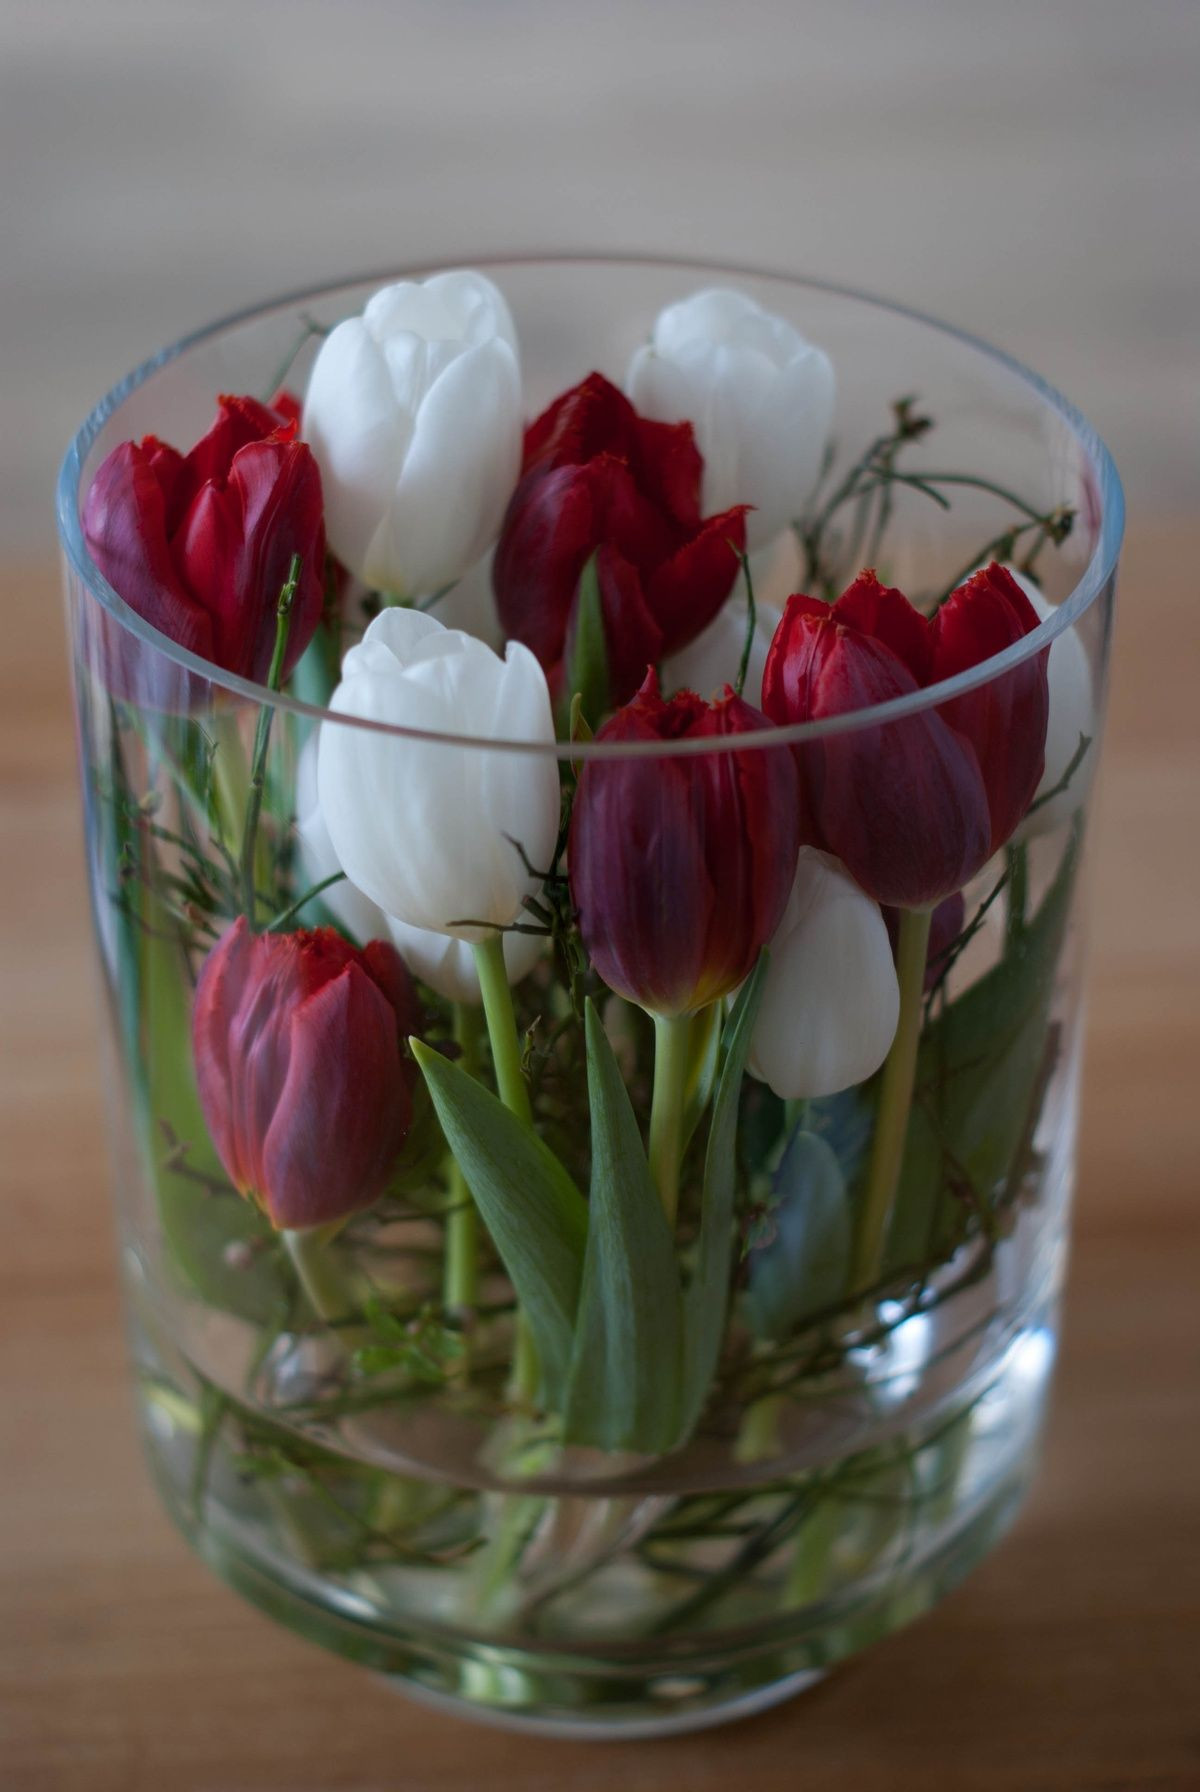 15 Stylish White Tulips In Glass Vase 2024 free download white tulips in glass vase of pin by chara nicolaou on flower pinterest flowers flower with regard to tulips in vase white tulips flower vases floral arrangements floral centerpieces